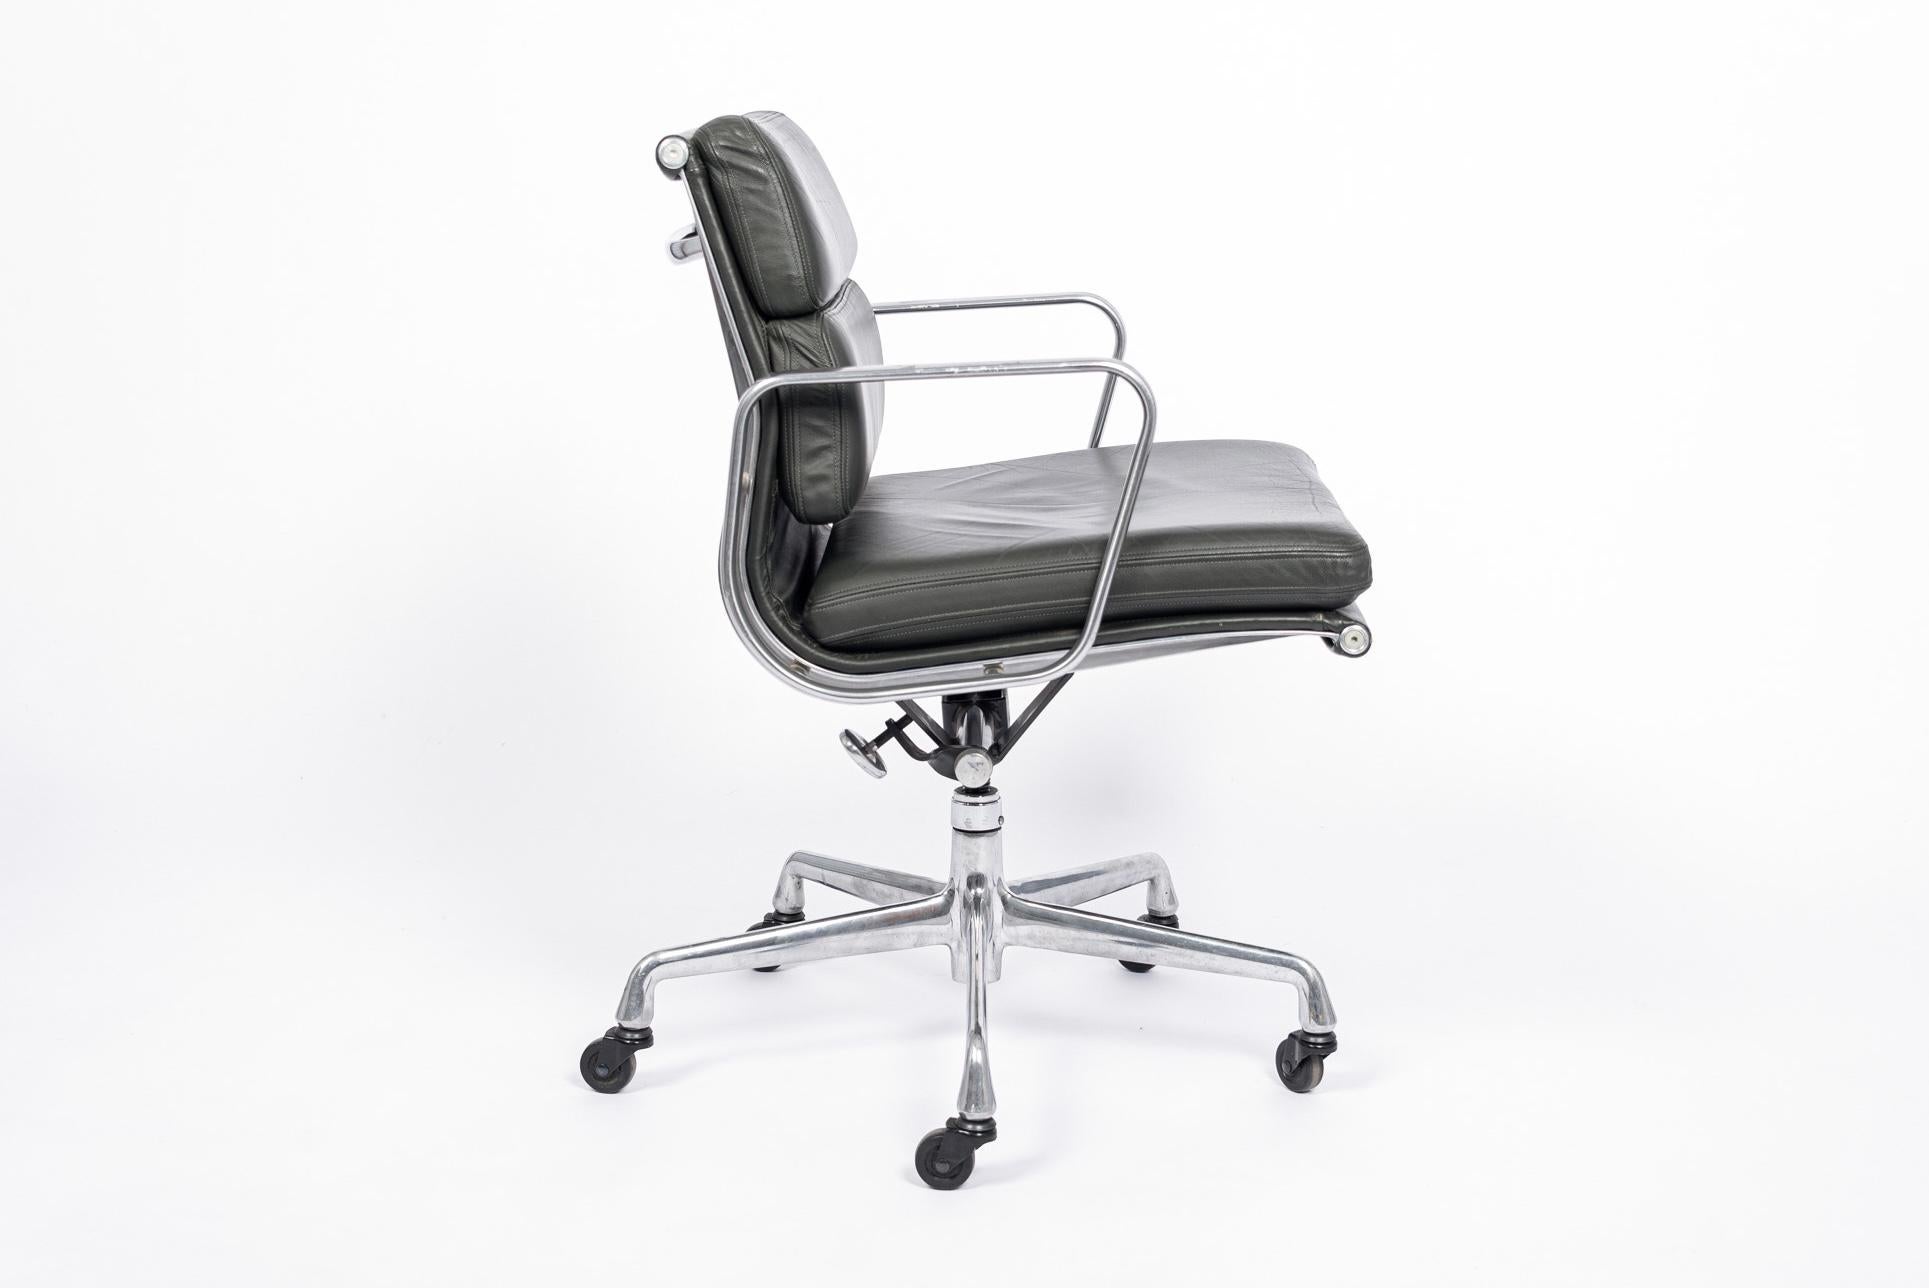 This authentic Eames for Herman Miller Soft Pad Management Height gray leather office chair from the Aluminum Group Collection was manufactured in the 2000s. This classic mid century modern office chair was first introduced in 1969 by Charles and